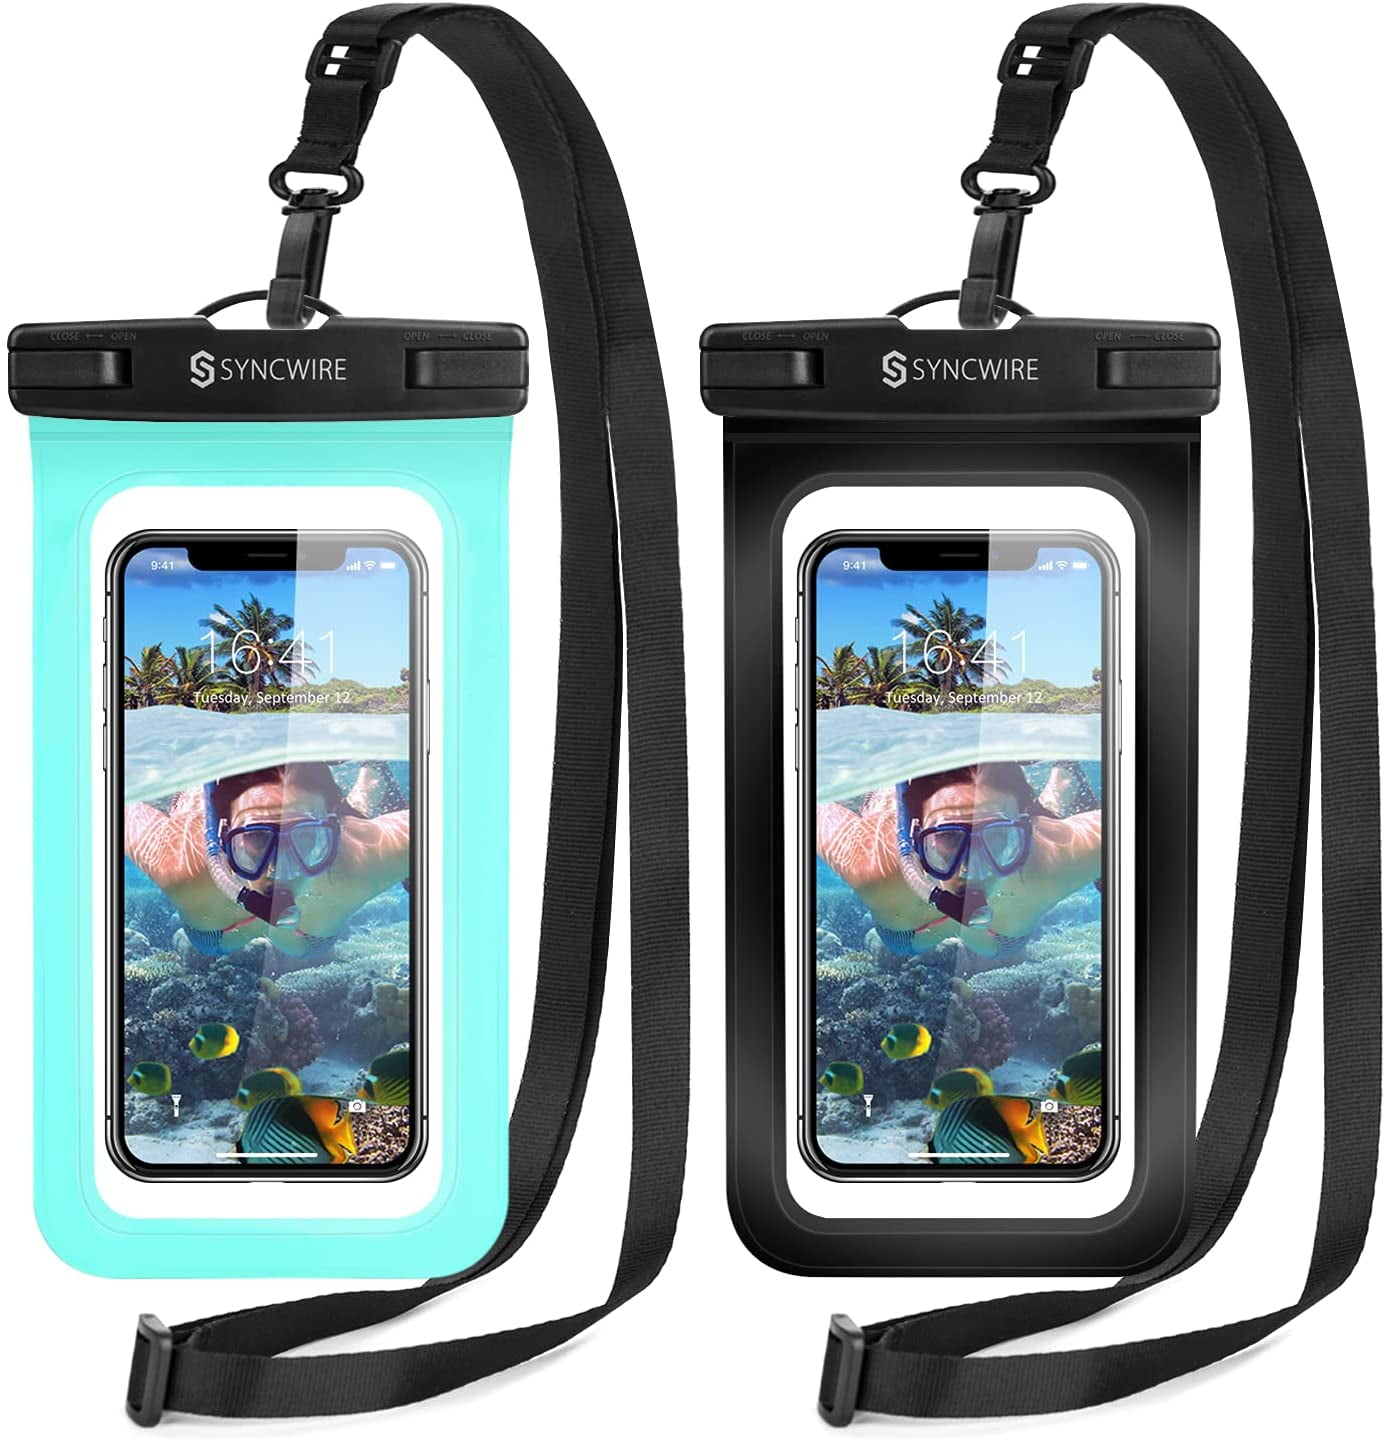 Underwater Waterproof Dry Bag Pouch Case For iPhone Samsung Cell Phone 